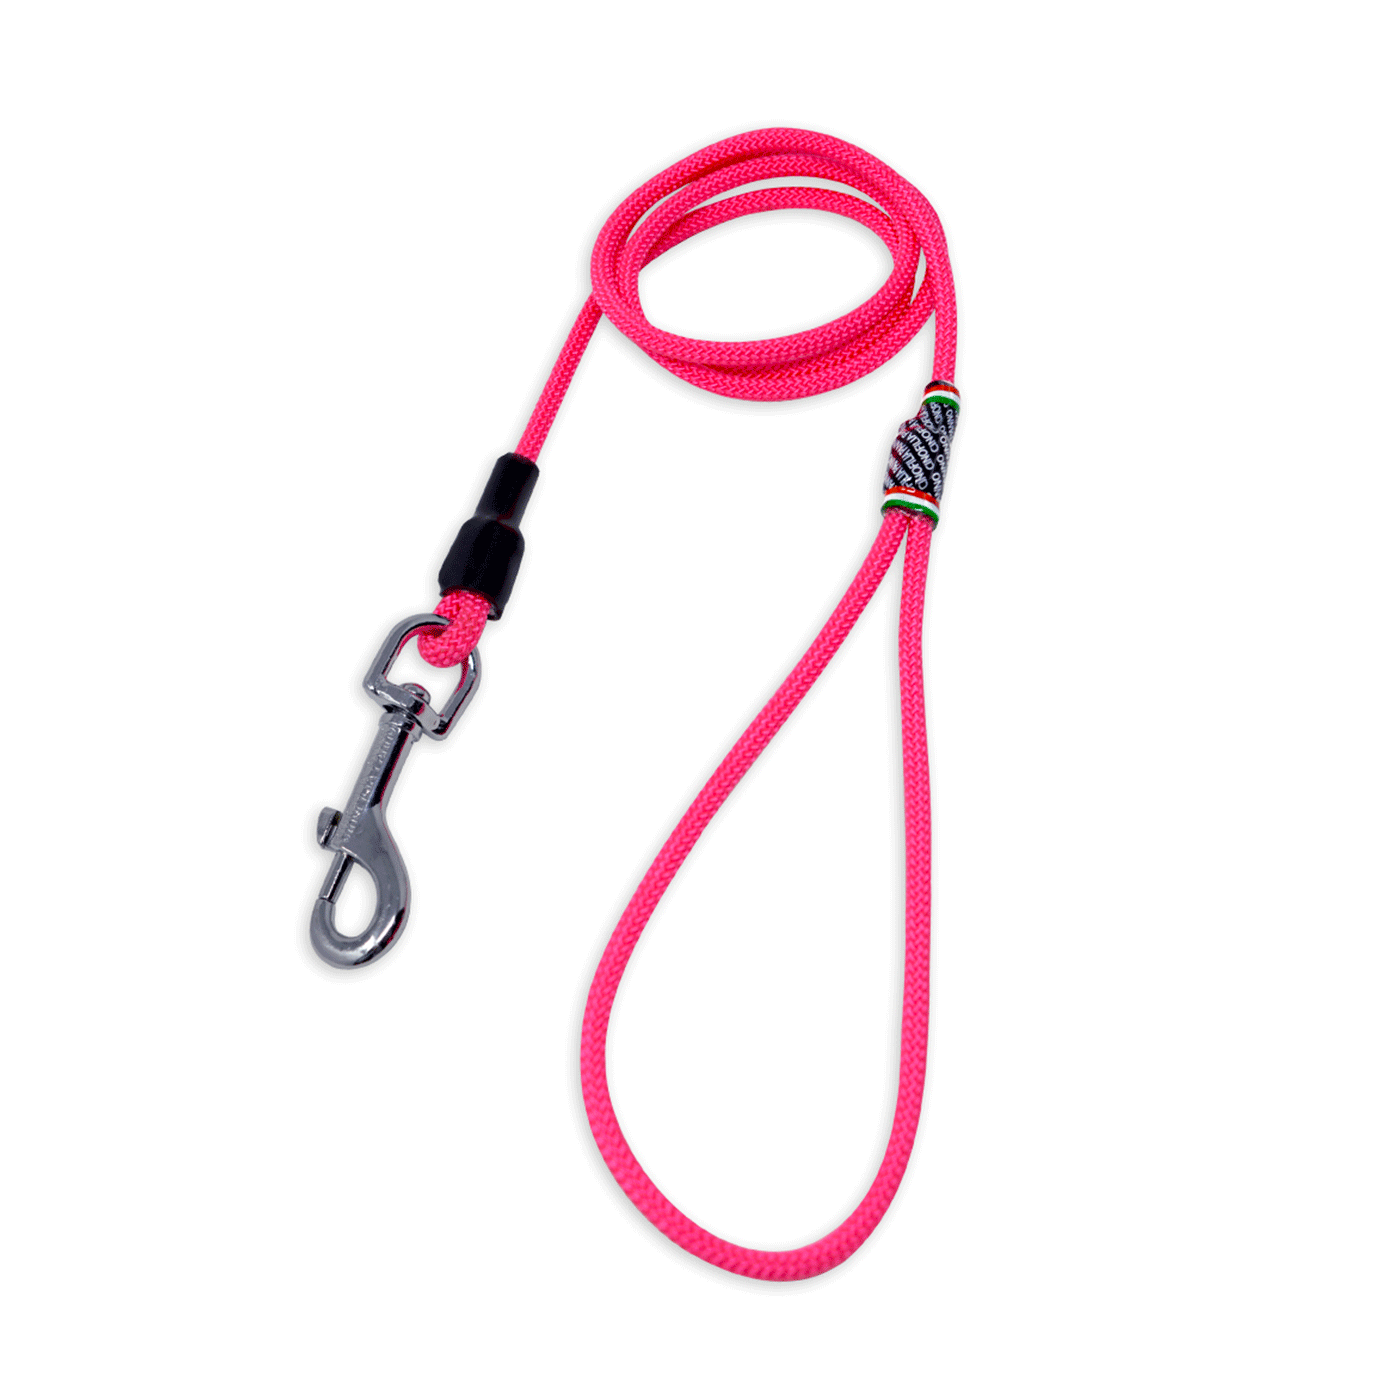 CLASSIC NAUTICAL CORD LEASH WITH SNAP HOOK 130cm (PINK)